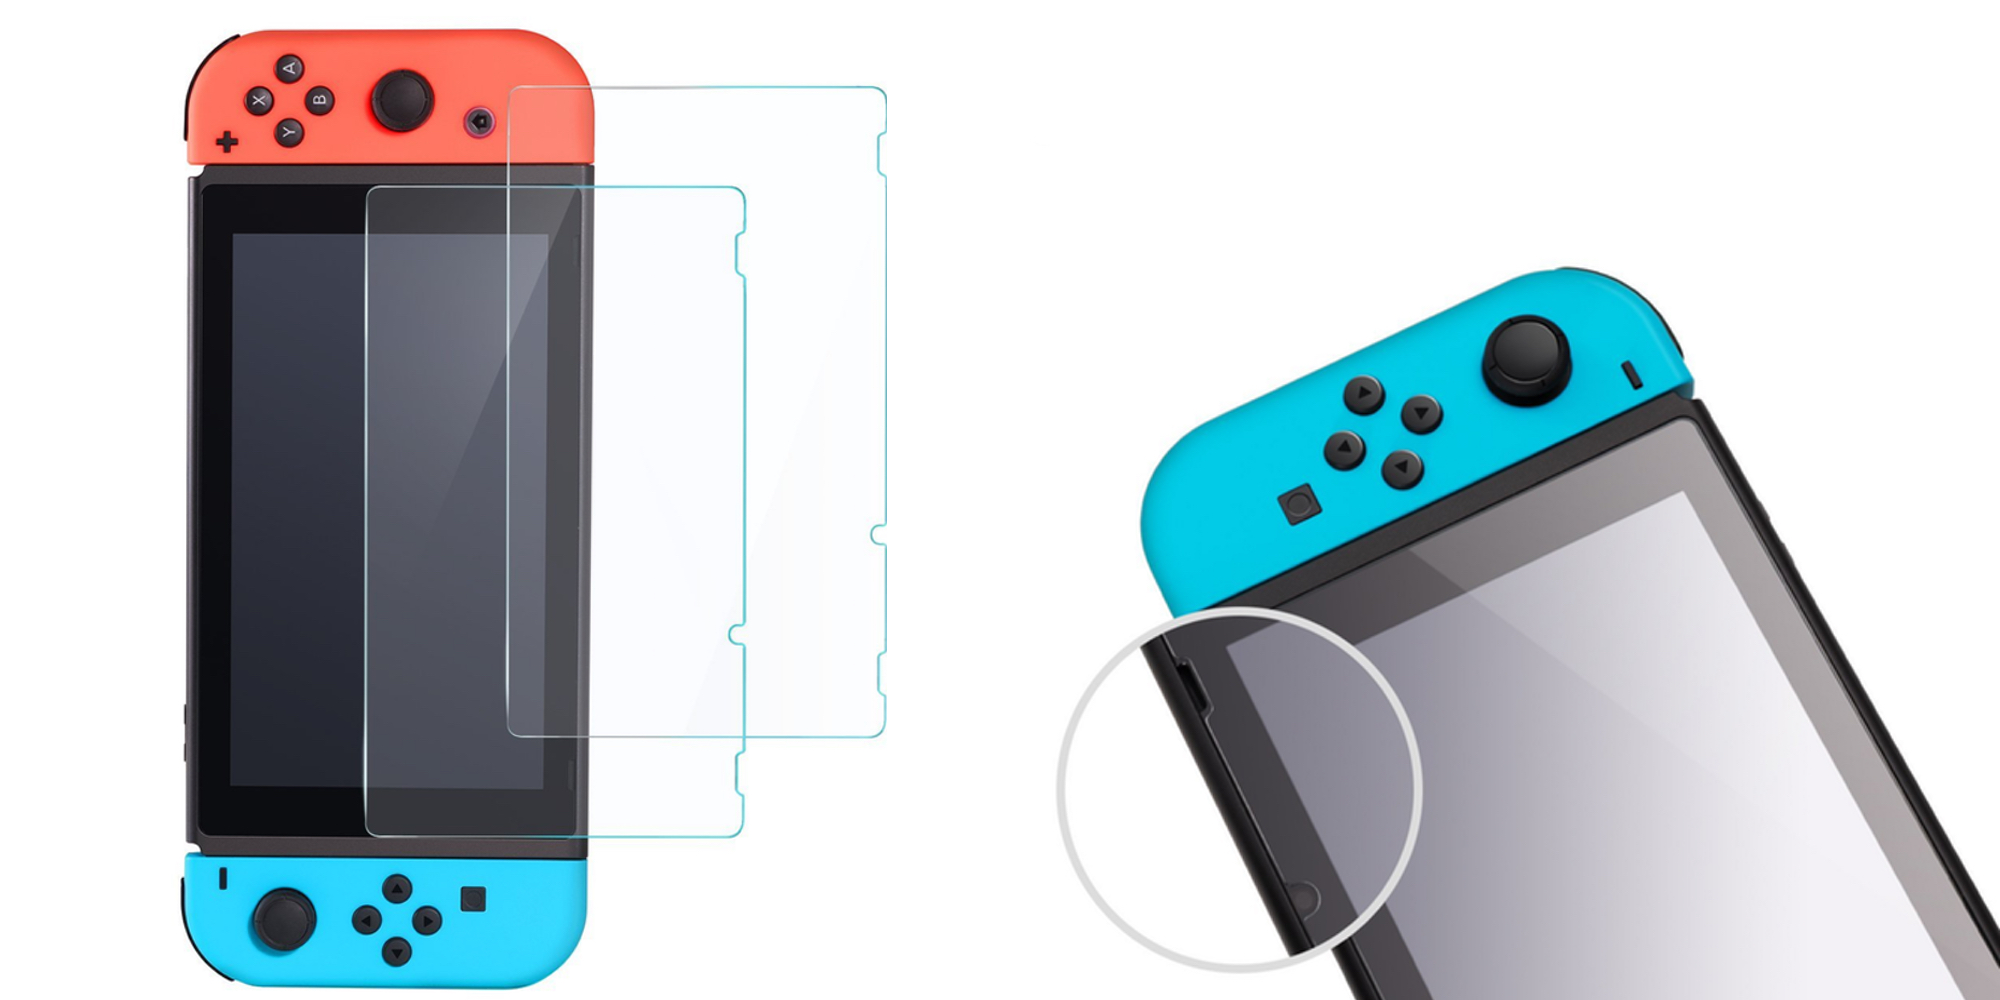 Anker 2-Pack Nintendo Switch GlassGuard Screen Protector for $7